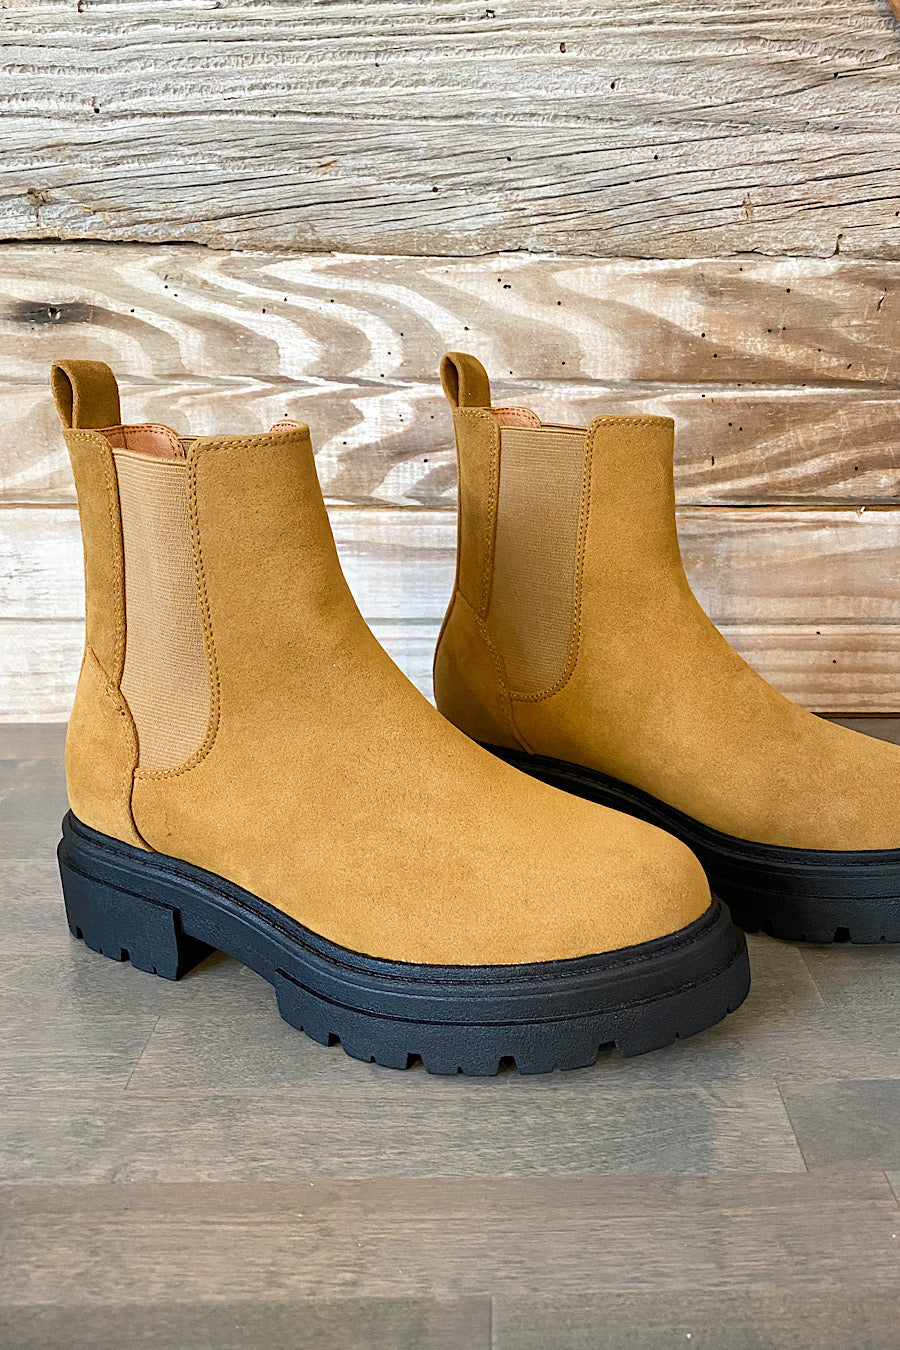 JADA Lug Sole Chelsea Boots in Whiskey